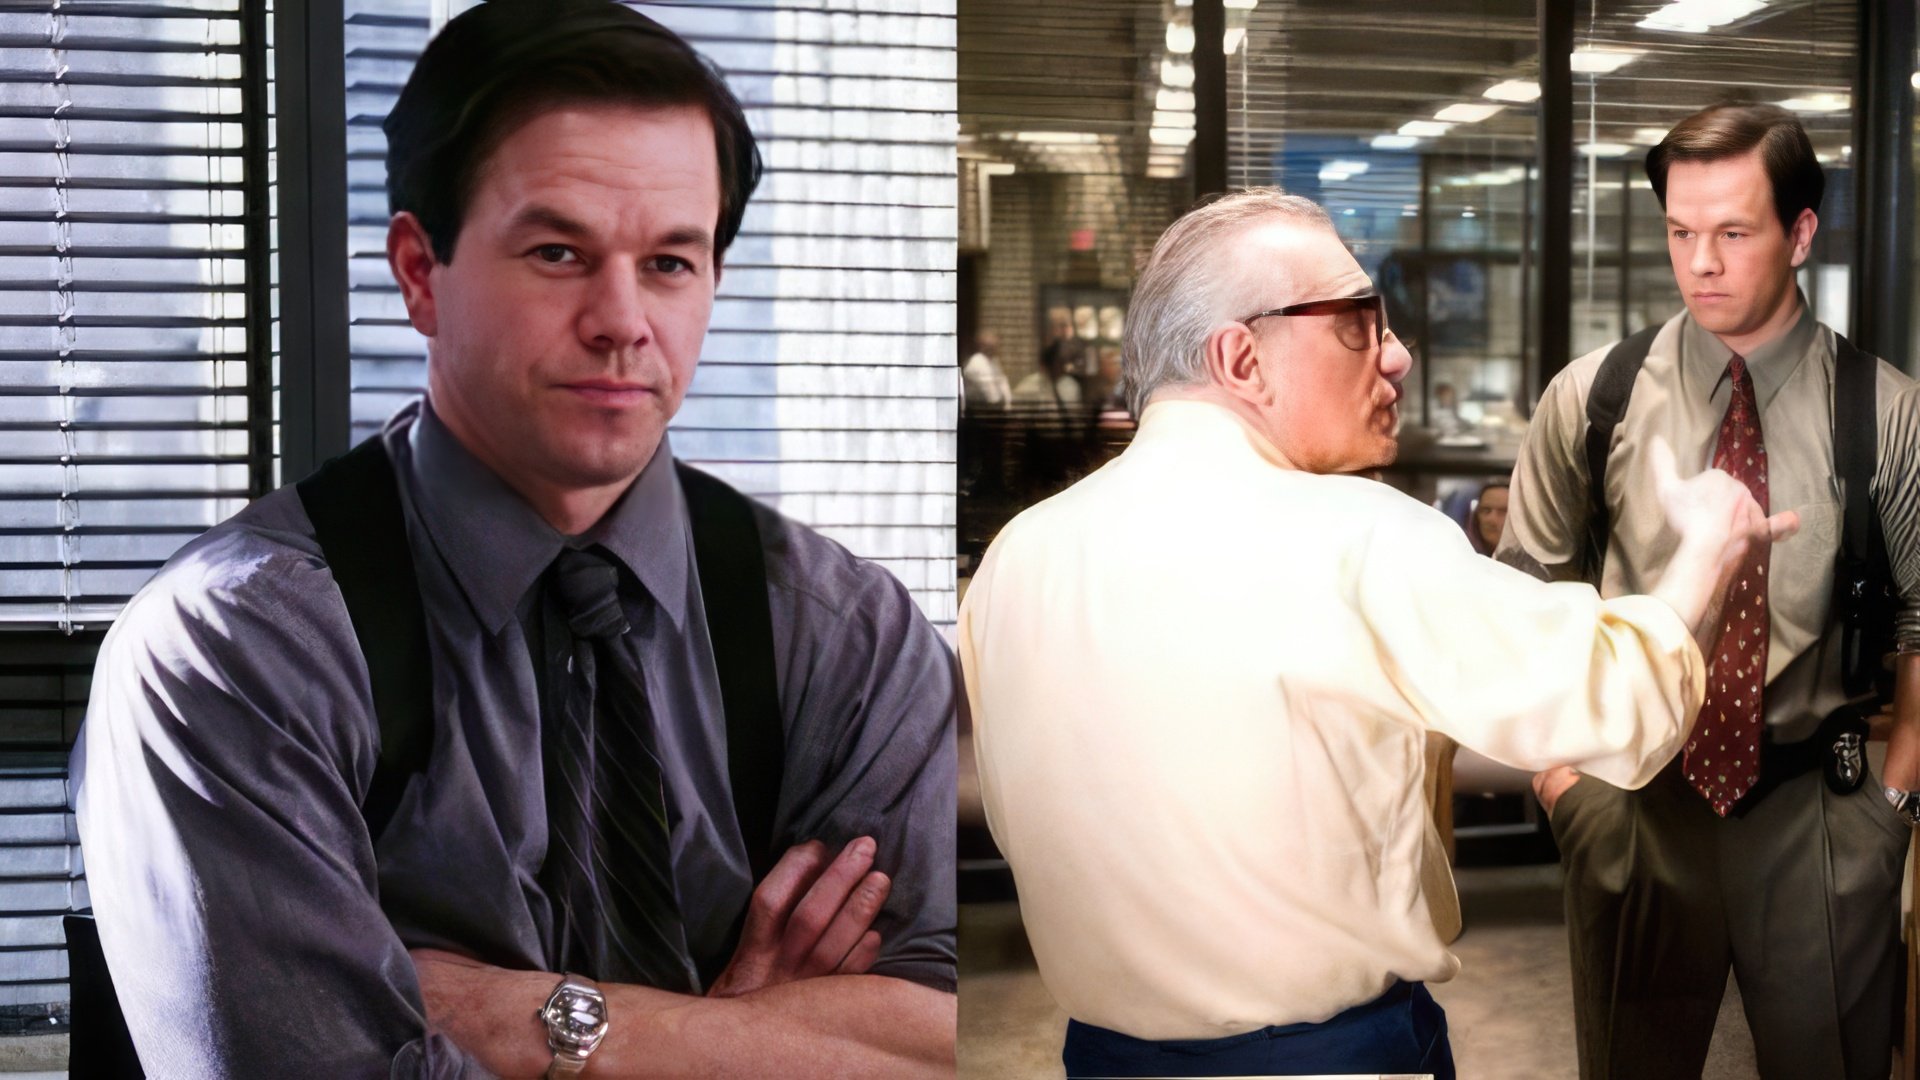 »The Departed» is the first collaboration for Mark Wahlberg and Martin Scorsese